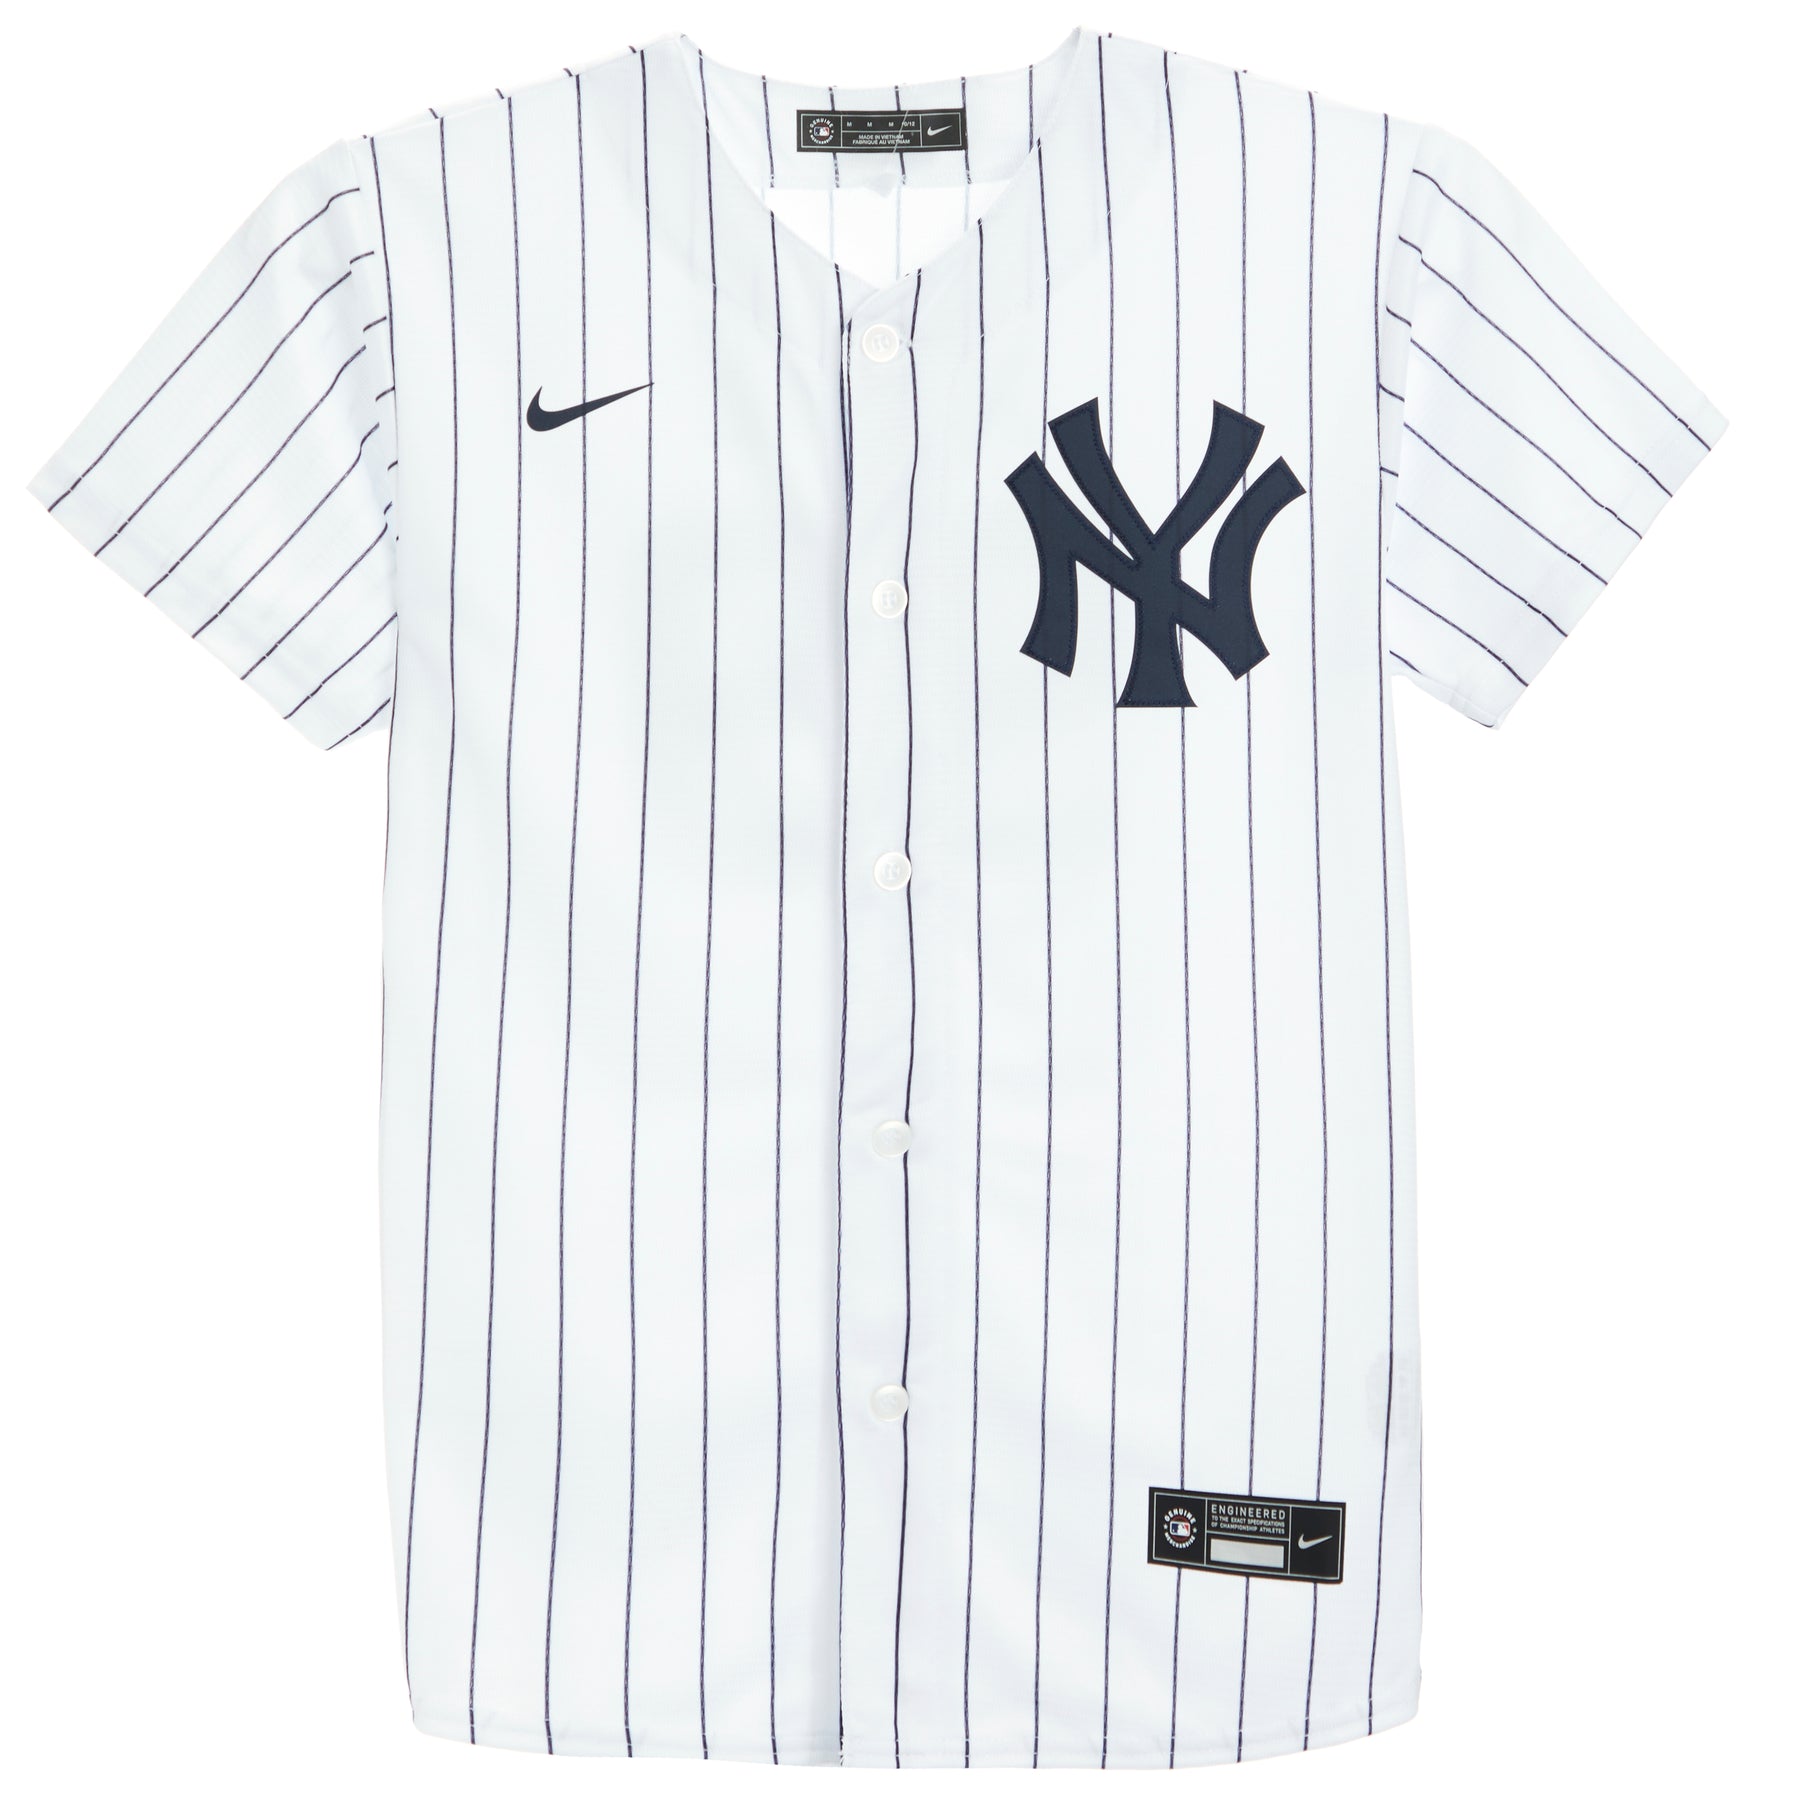 Judge/Yankees Twill Finished Home Jersey